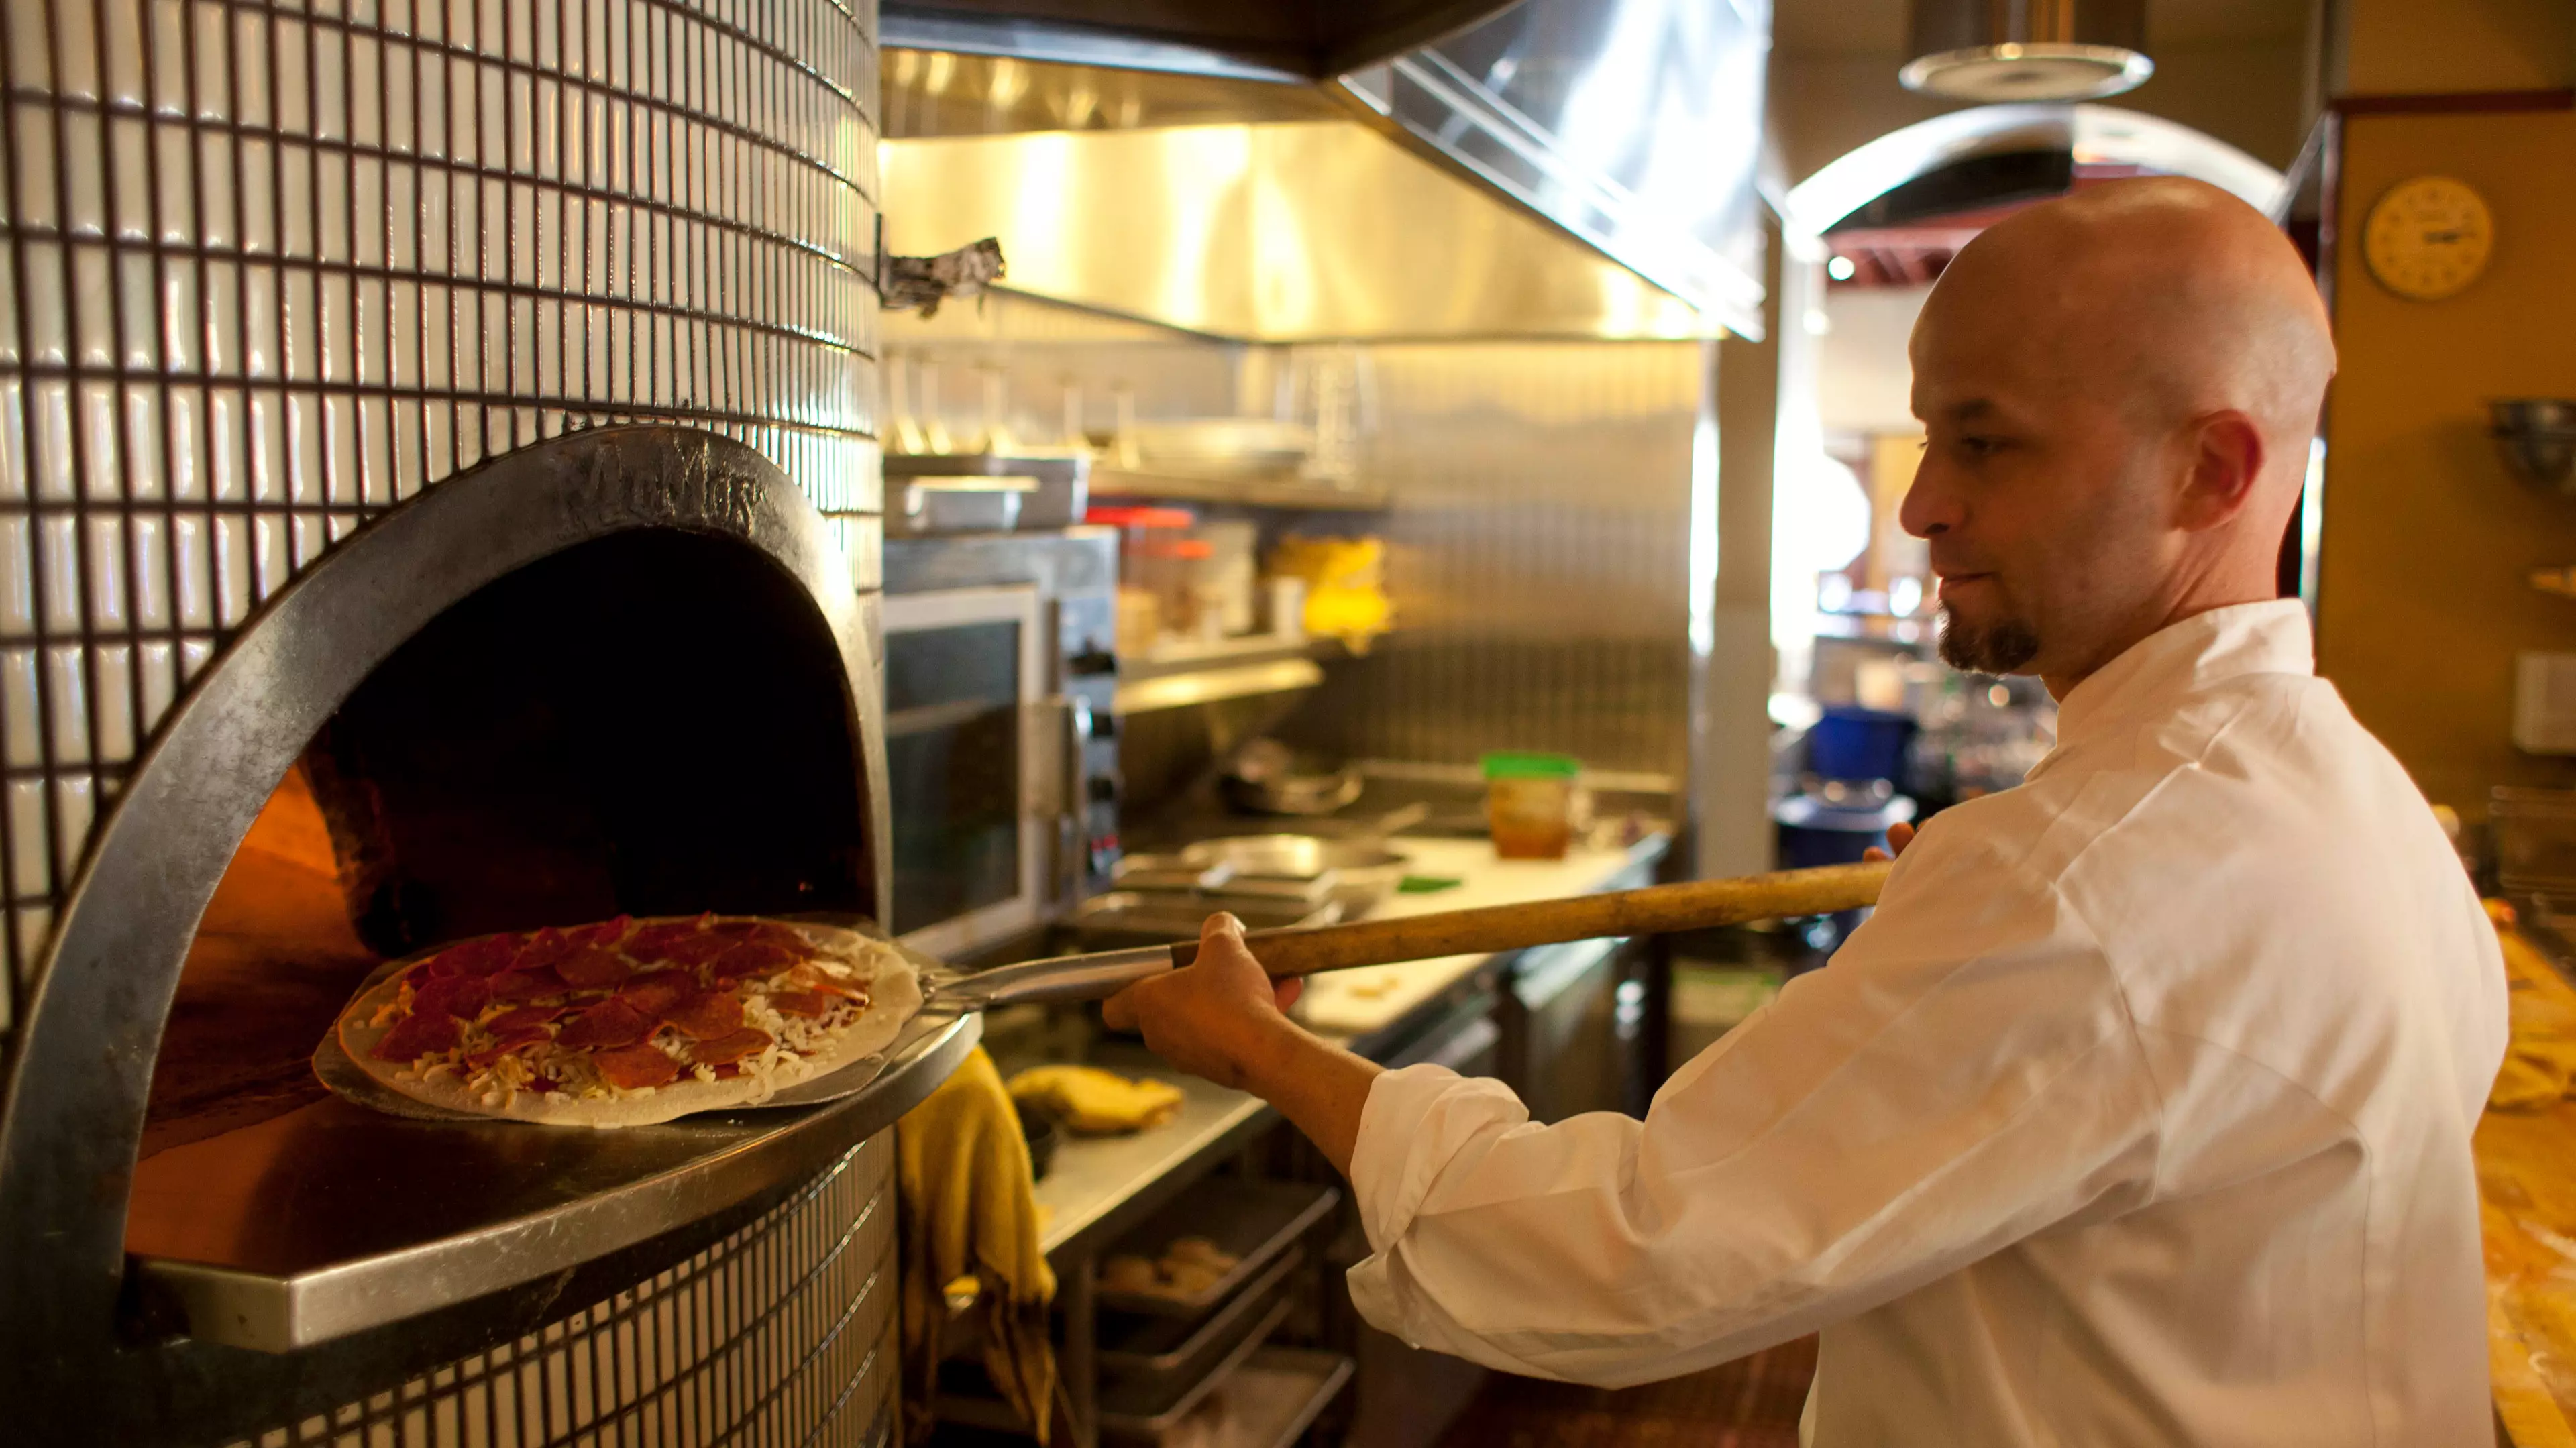 Woman Places Order For Pineapple Pizza, Chef Understandably Has Other Ideas